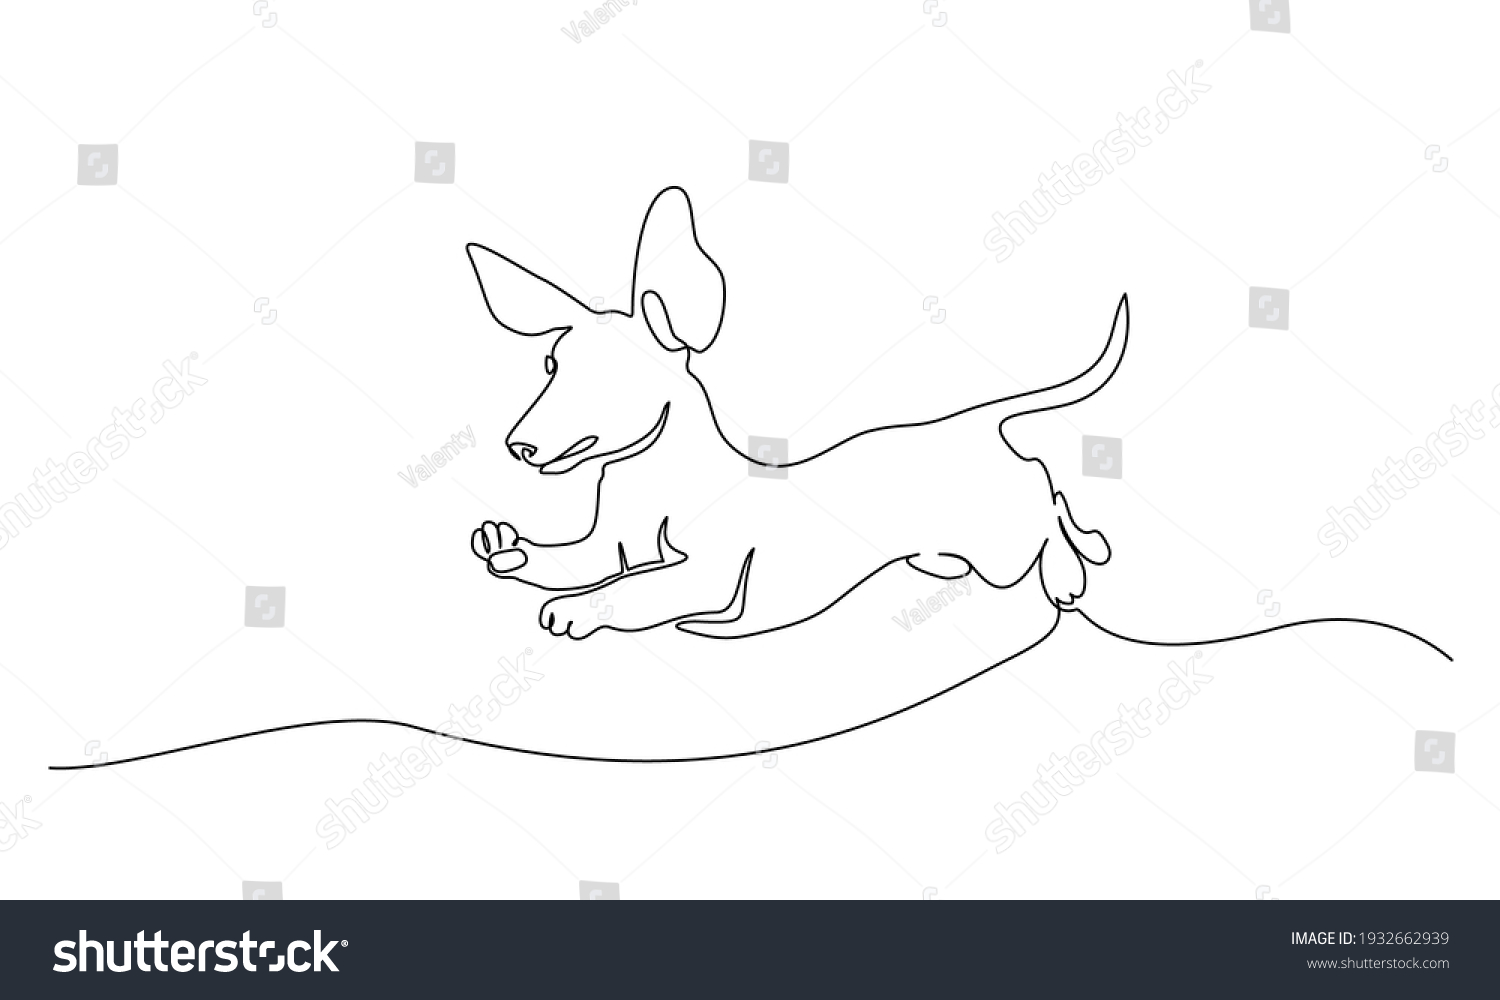 SVG of Dachshund dog running design silhouette. Continuous one line drawing. Hand drawn minimalism style vector illustration svg